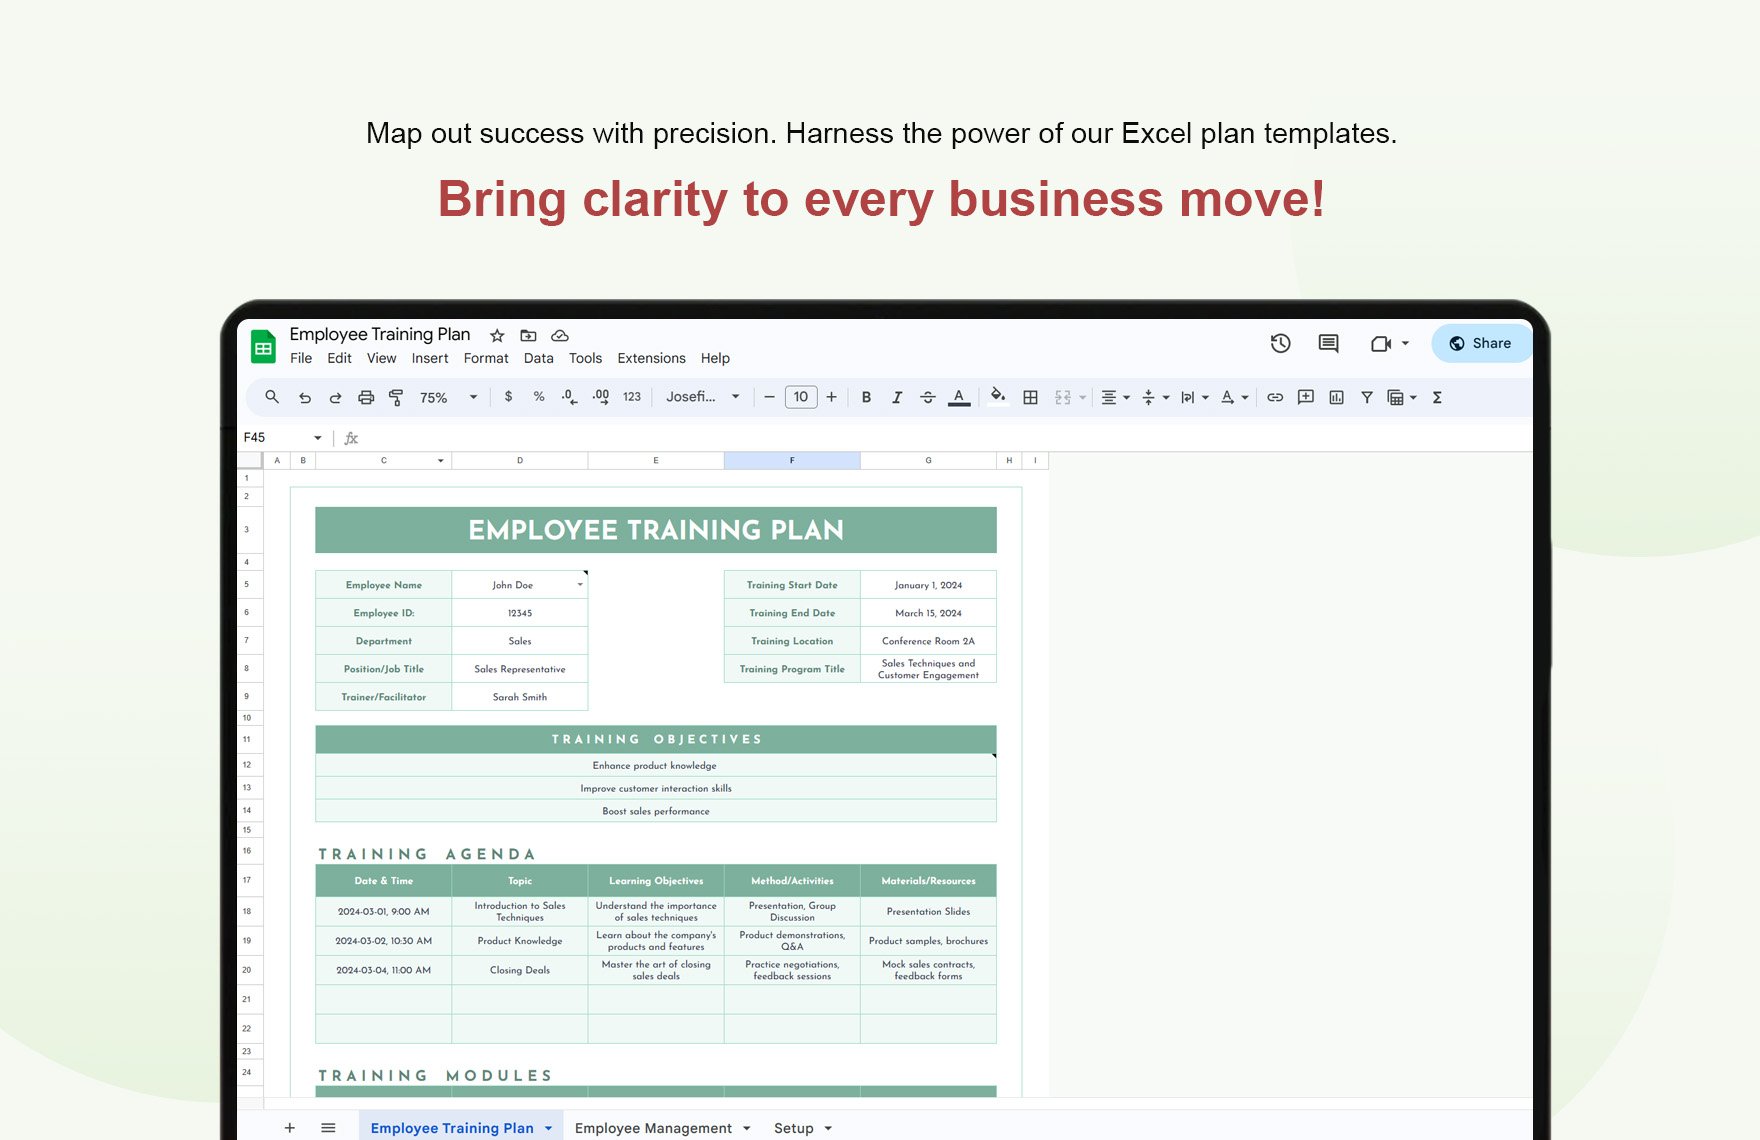 Employee Training Plan Template - Download in Excel, Google Sheets ...